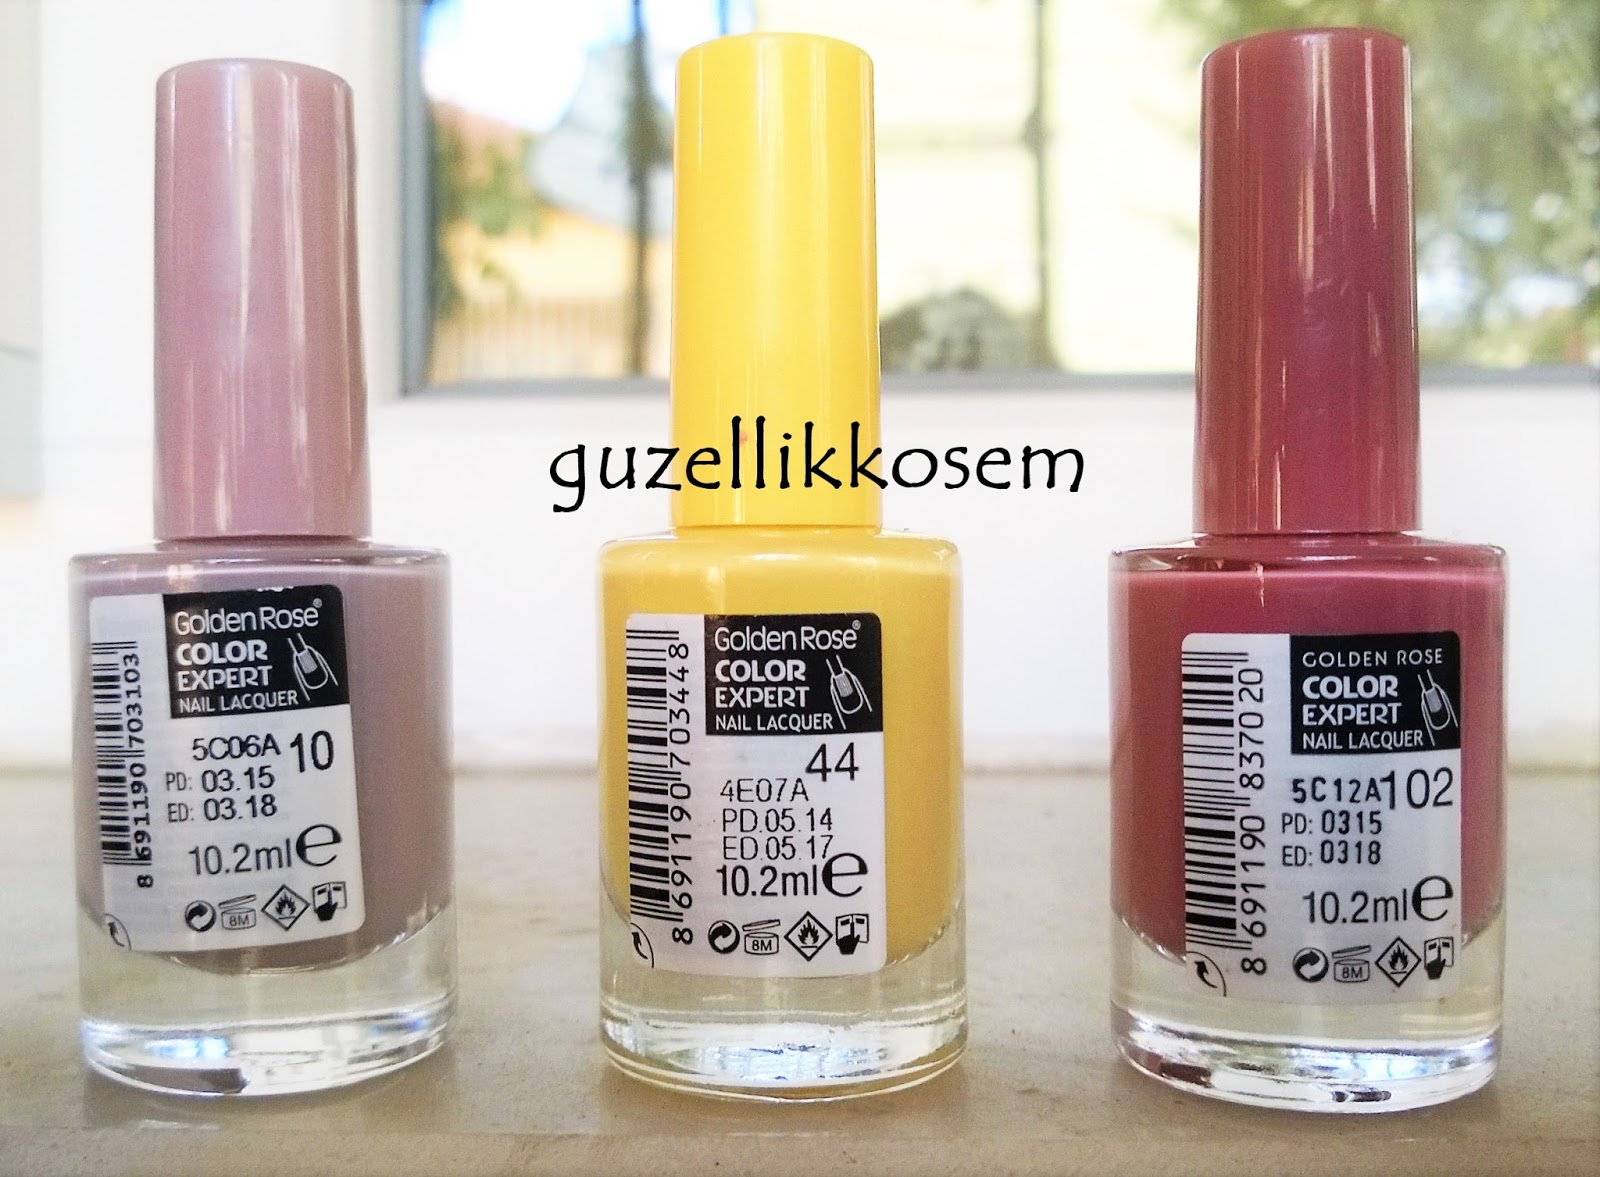 Golden Rose Color Expert Nail Lacquer 102 Ingredients - wide 1